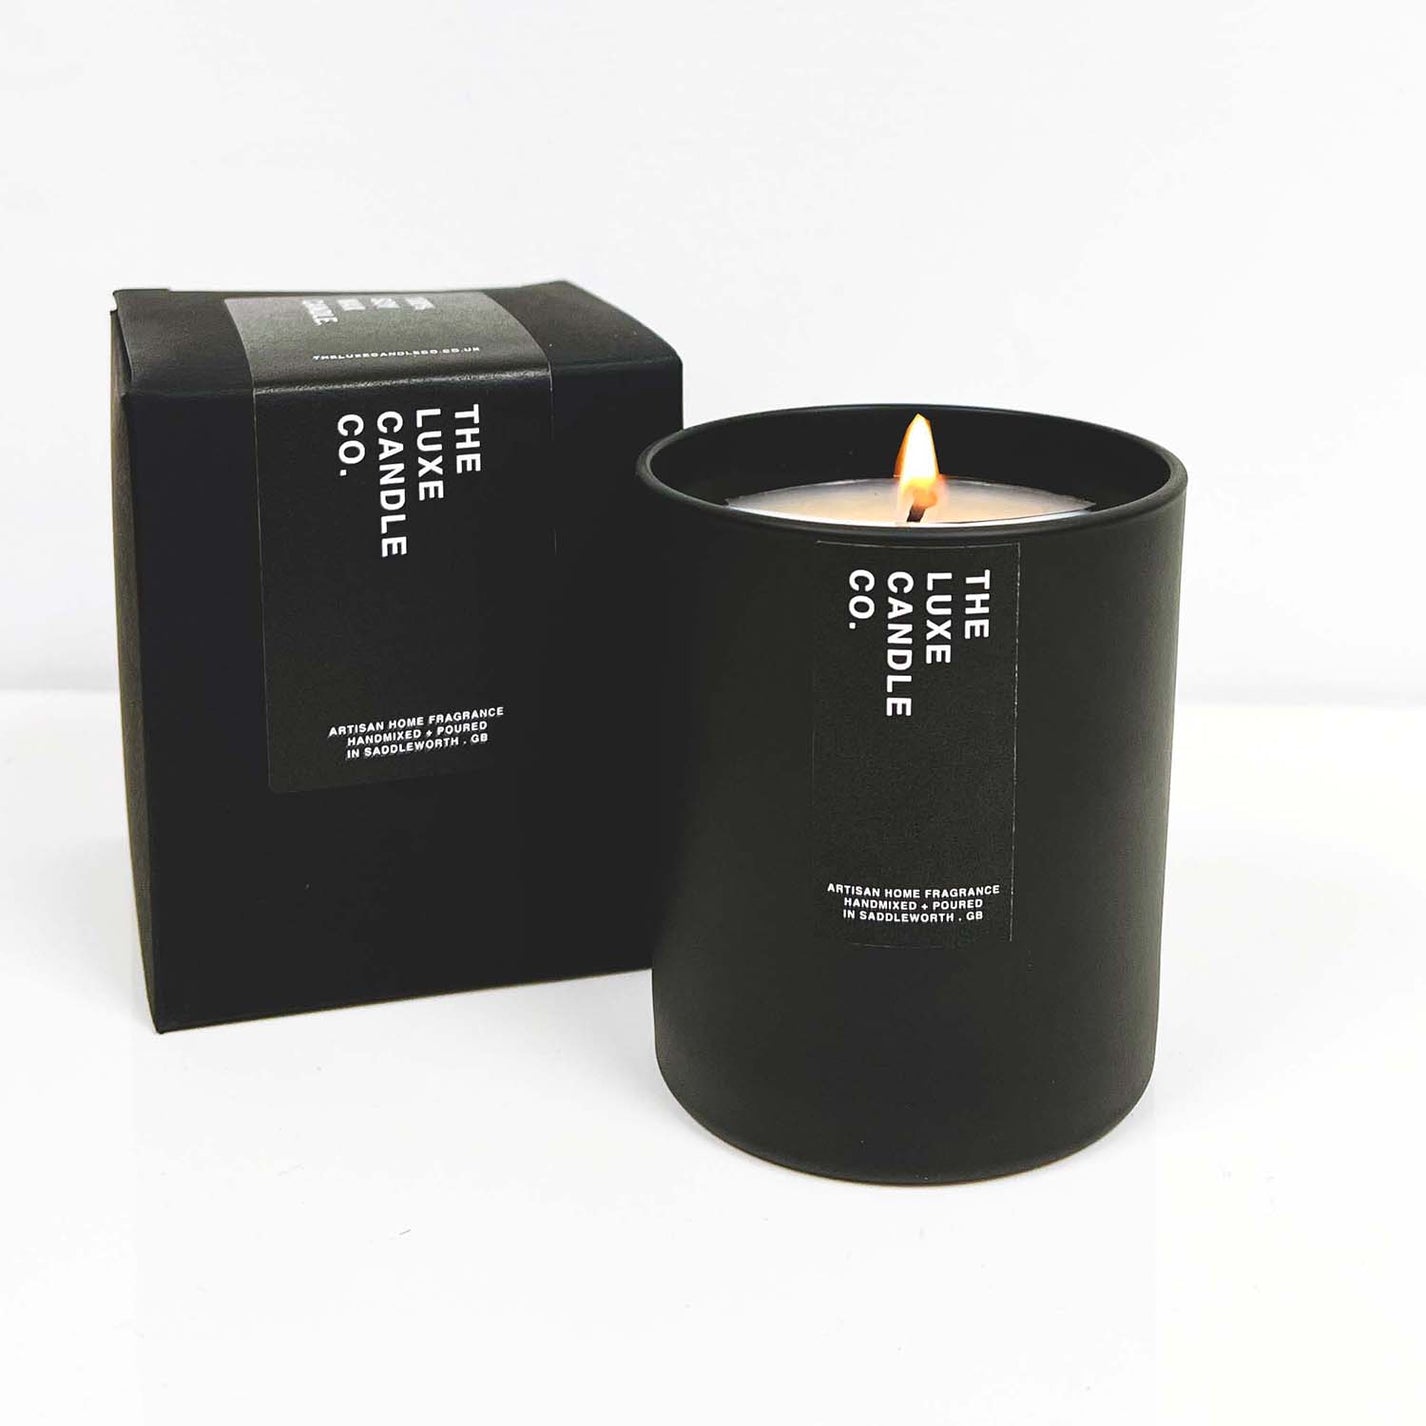 Luxury soy wax candle with patchouli scent fragrance in black glass jar